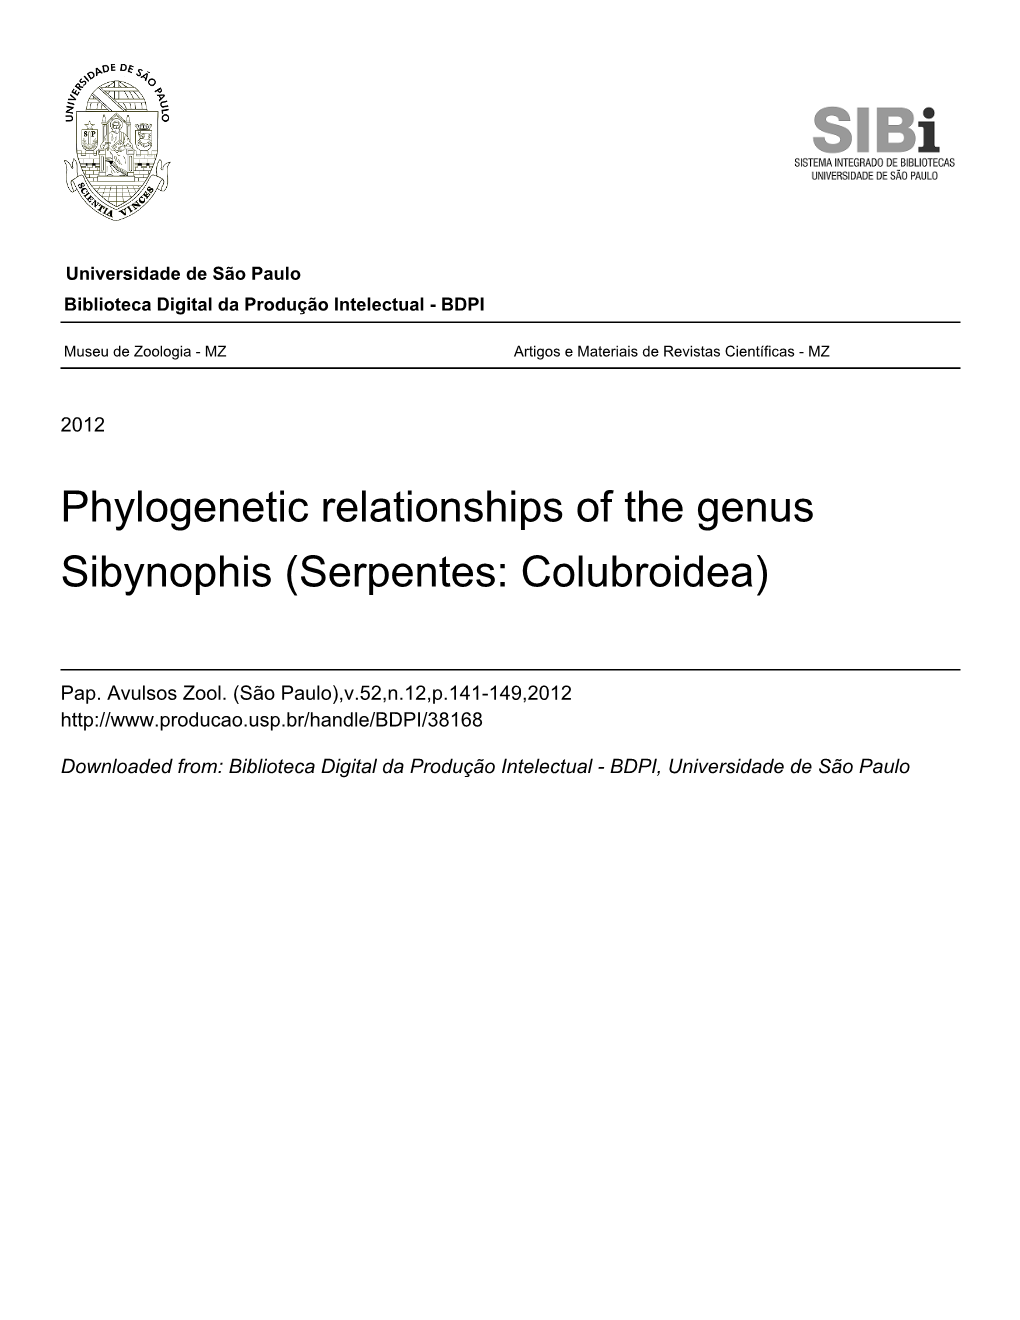 Phylogenetic Relationships of the Genus Sibynophis (Serpentes: Colubroidea)